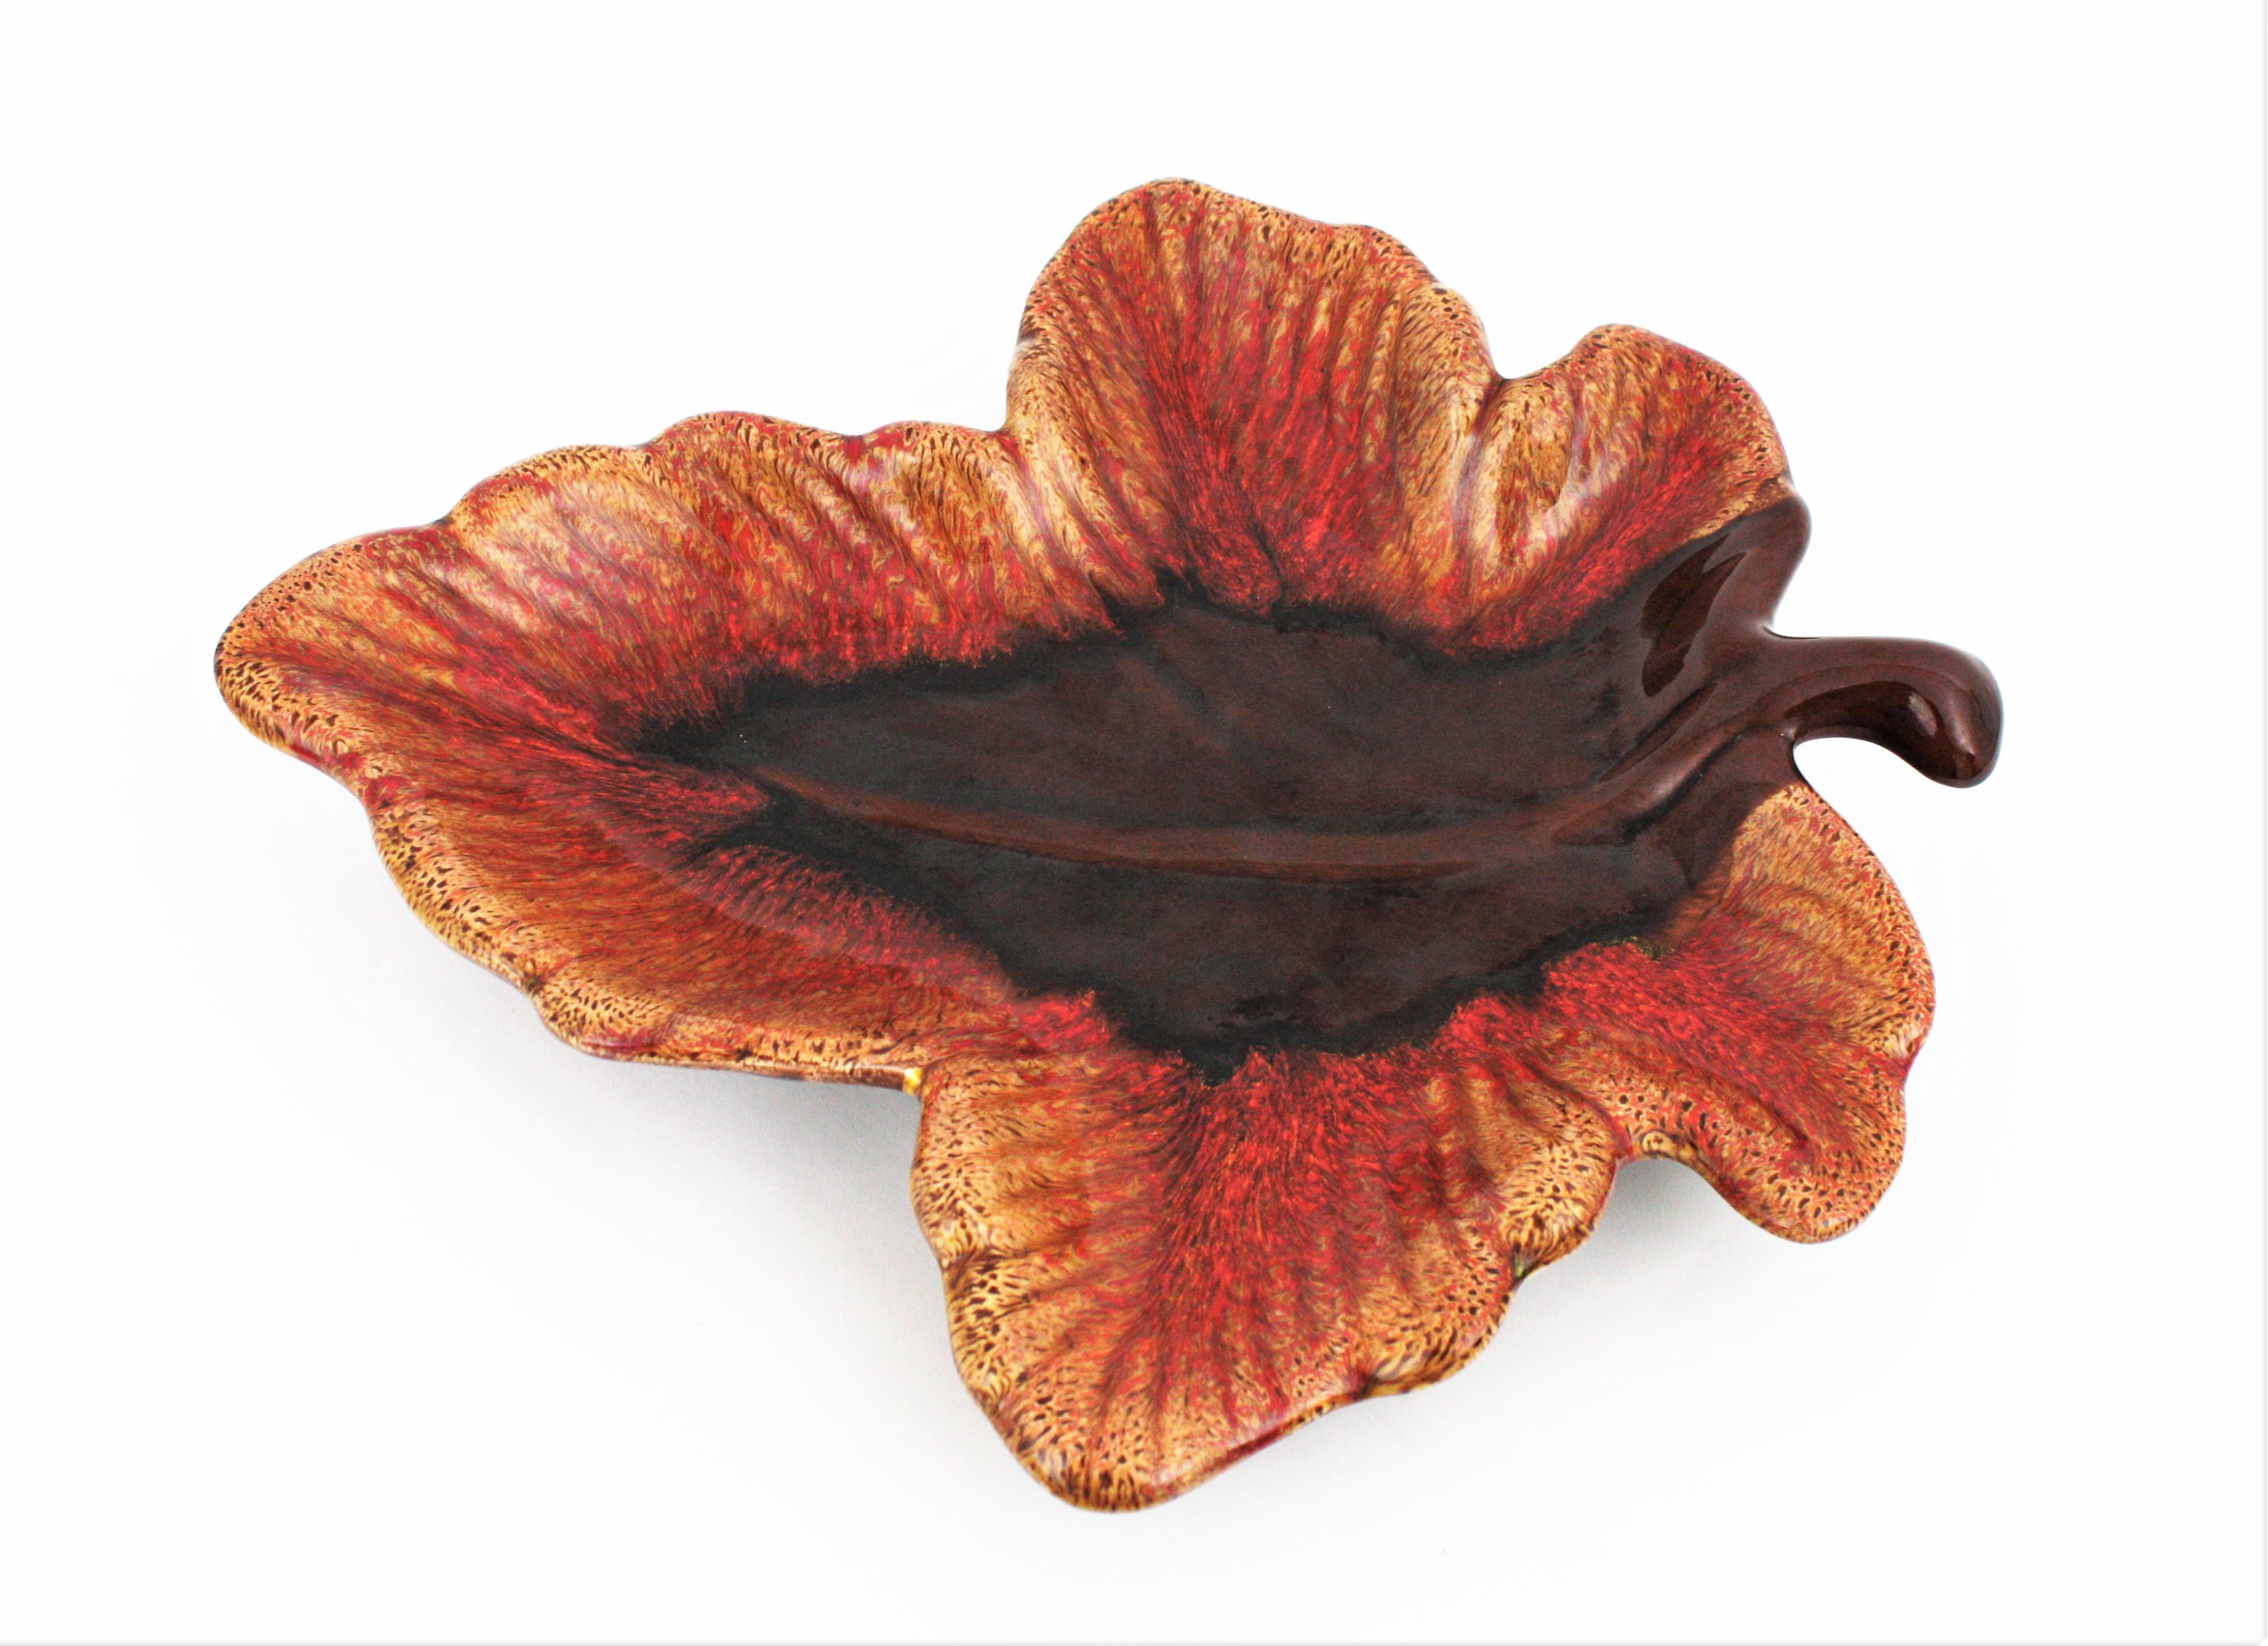 Impressive and colorful extra large leaf shaped glazed ceramic platter, serving tray or centerpiece manufactured by Vallauris. France, 1950-1960s.
Interesting to be used as centerpiece, fruit platter or cakes platter or serving tray. Its large